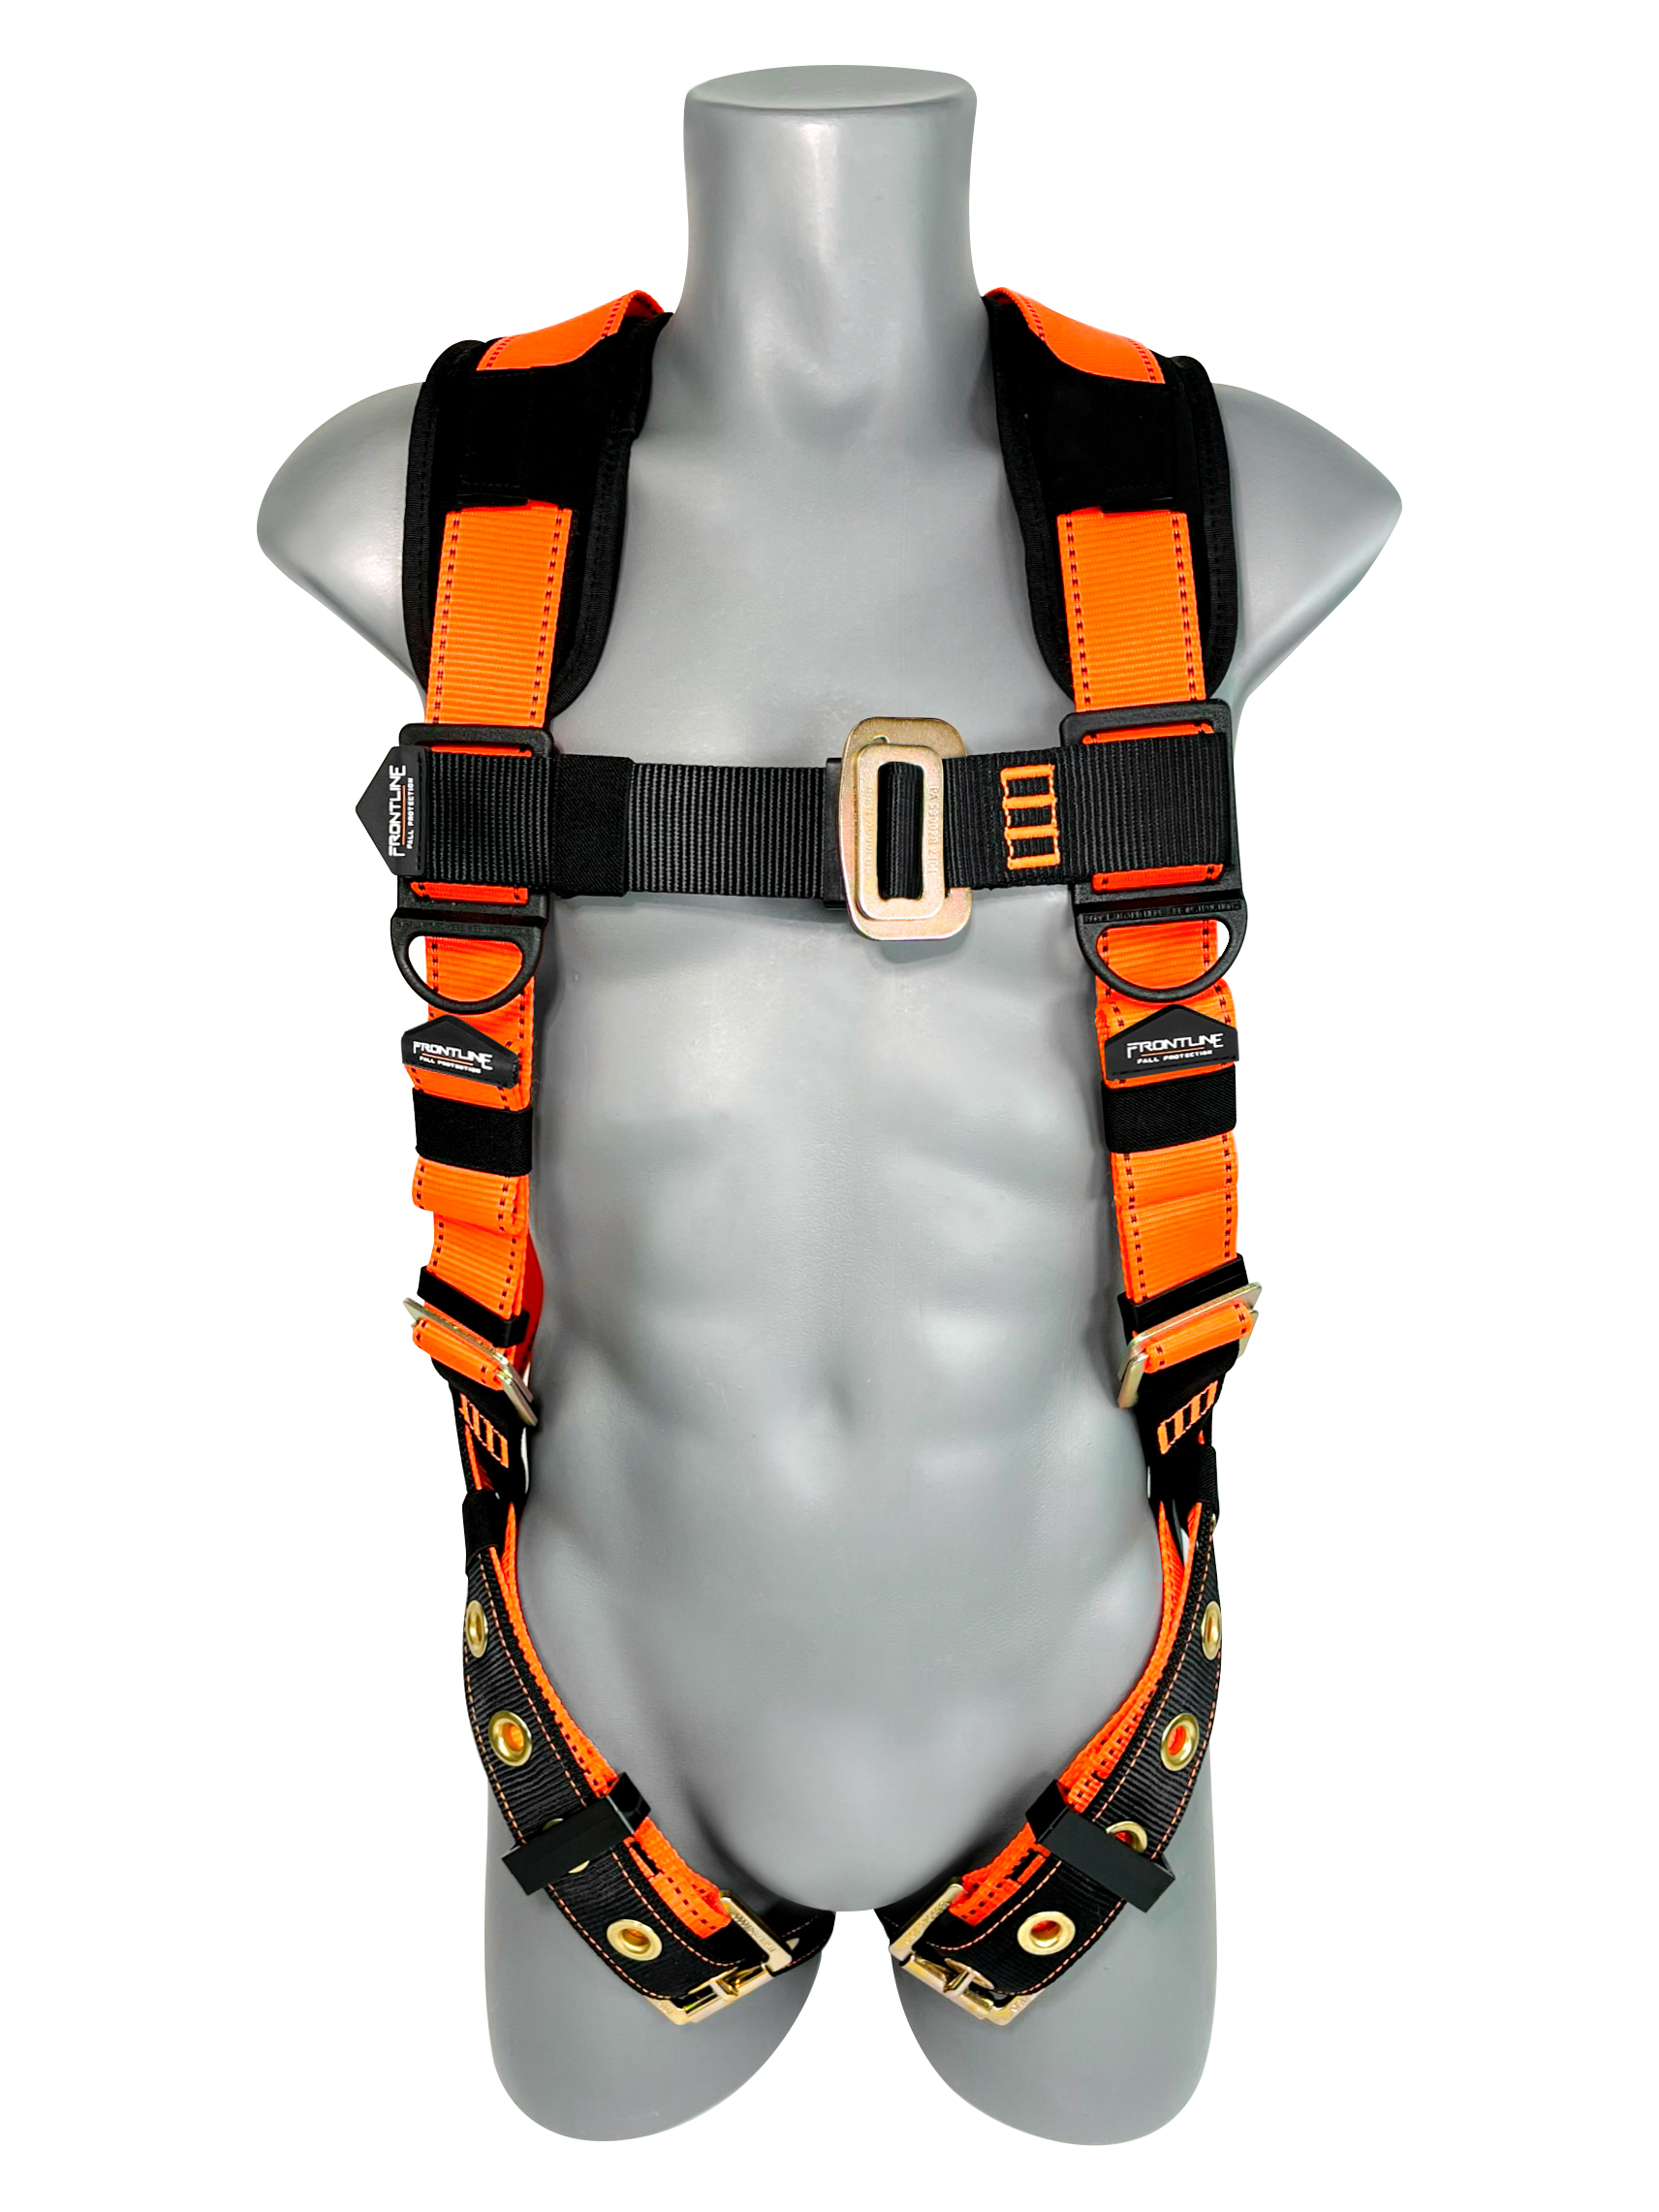 50VTB-3X/4X Combat Economy Series Full Body Harness with Tongue Buckle Belt